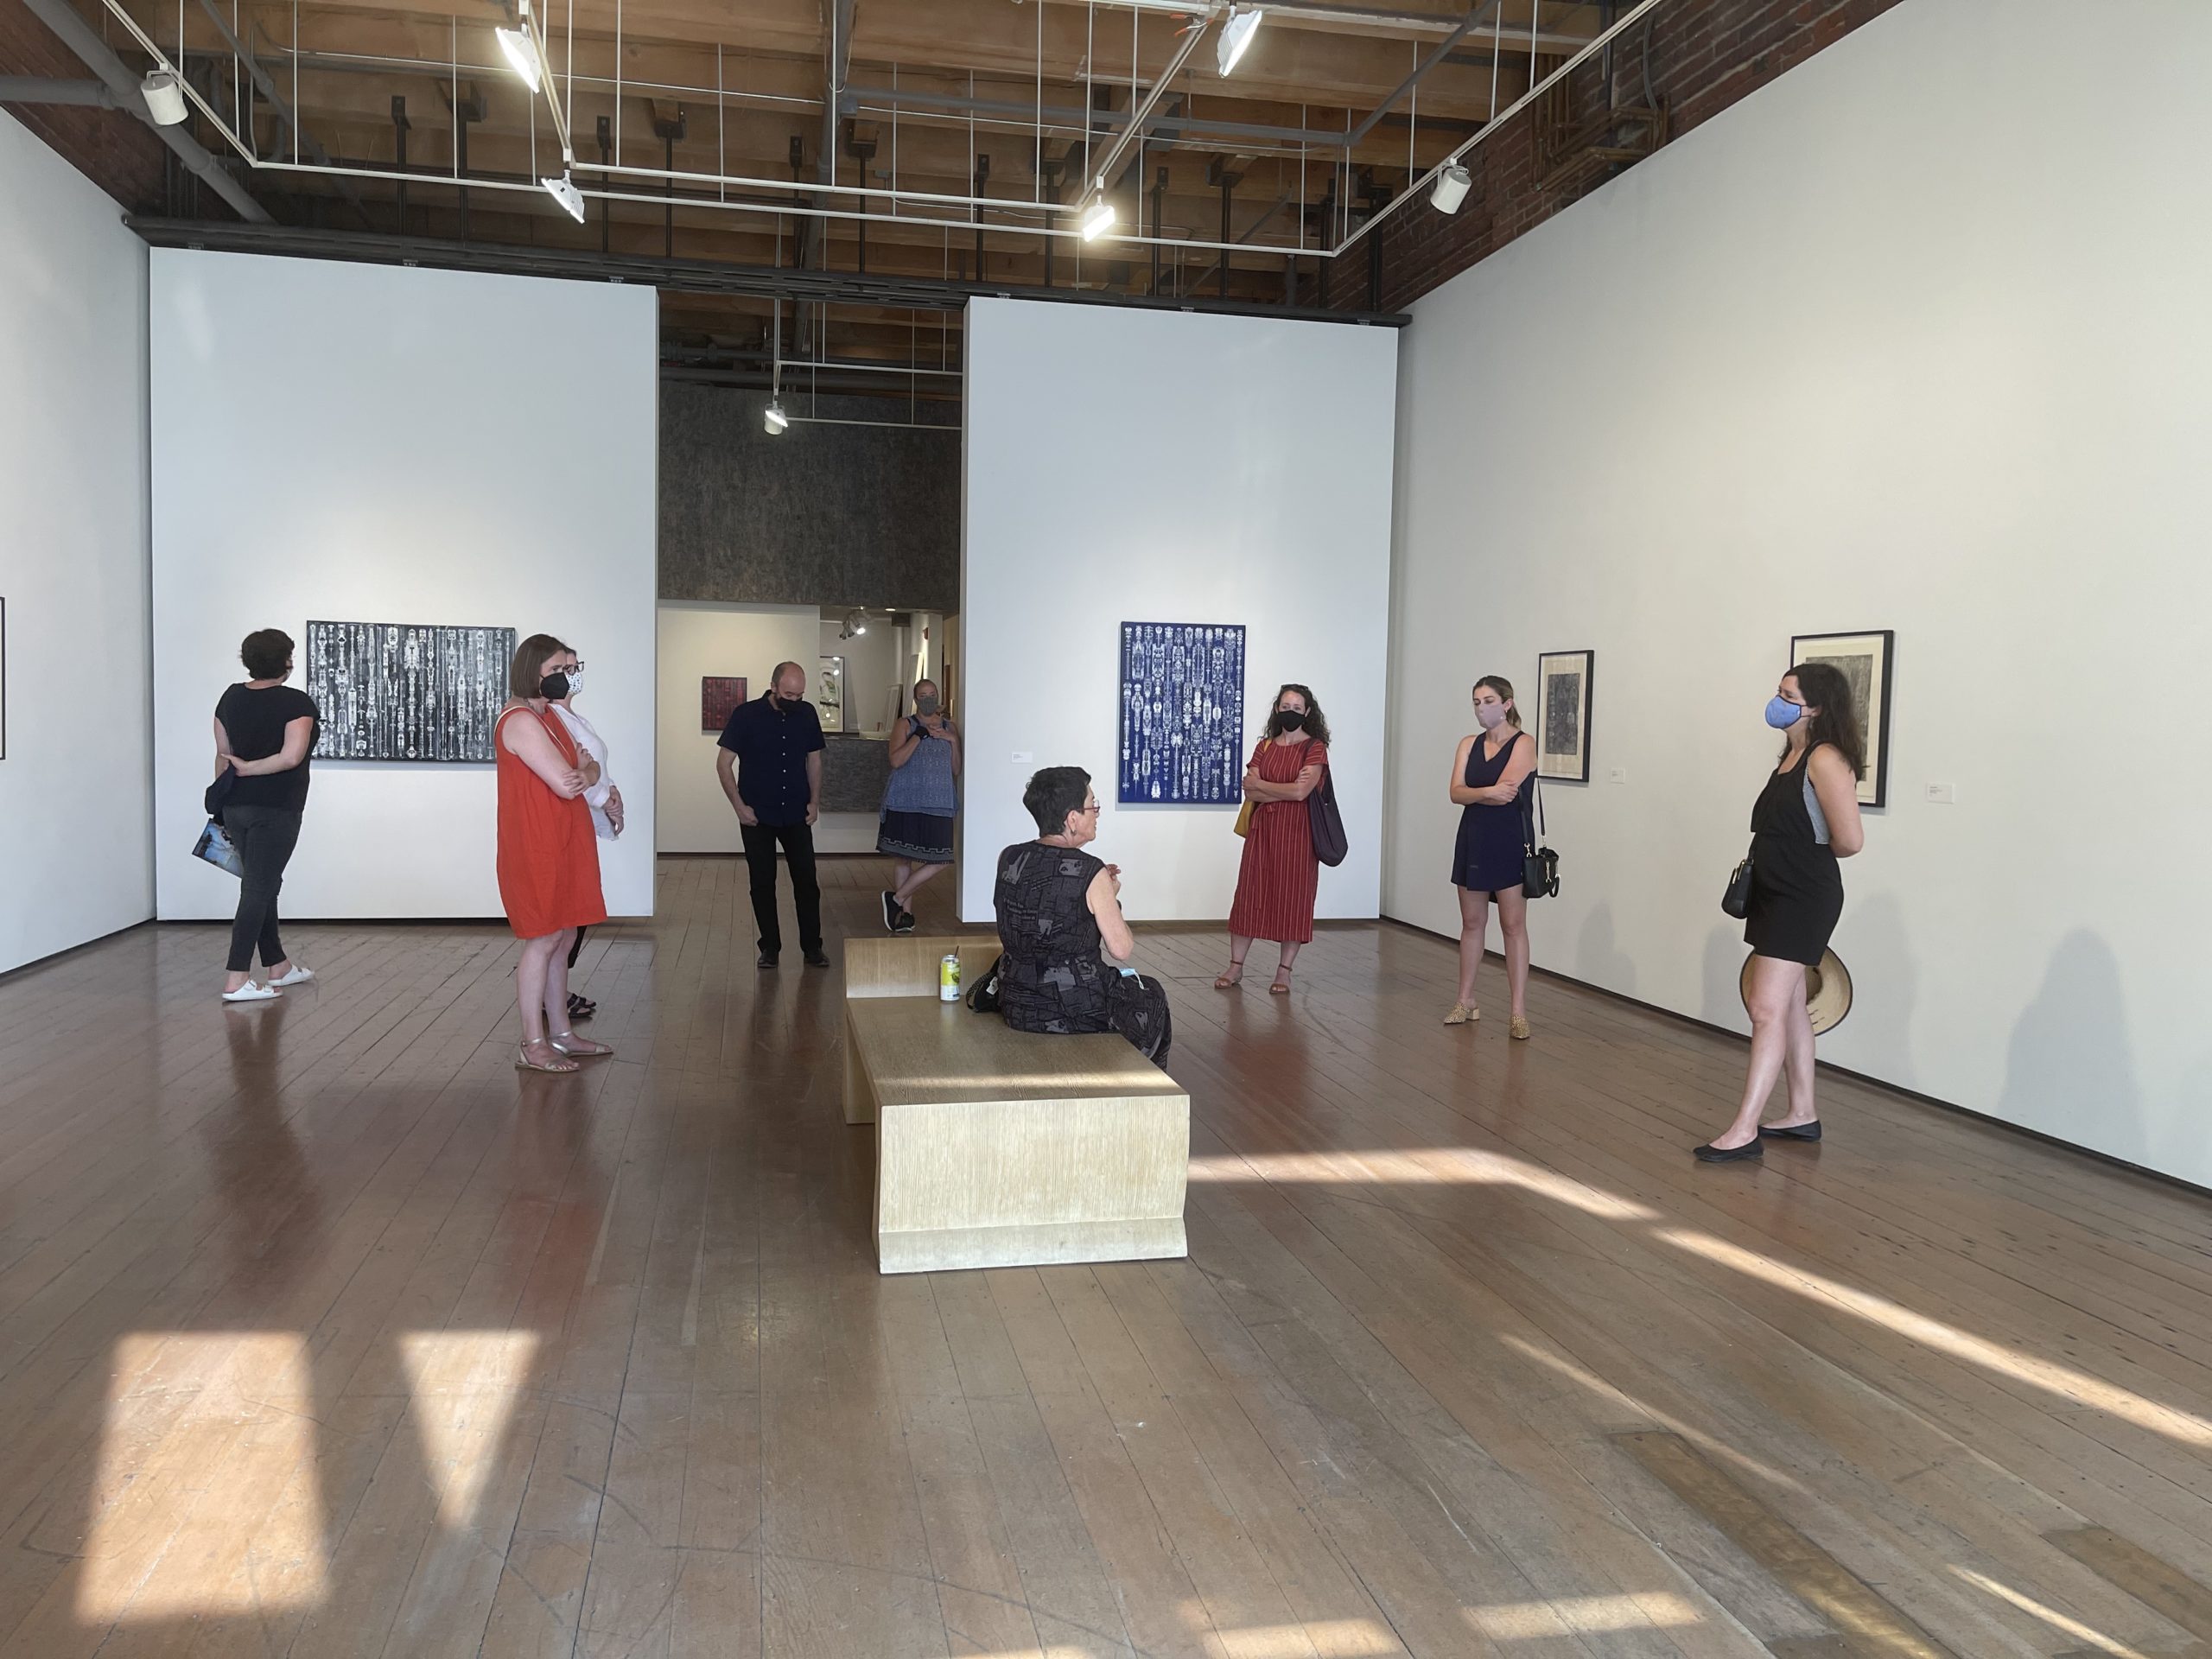 Northwest members socially distanced in a gallery space